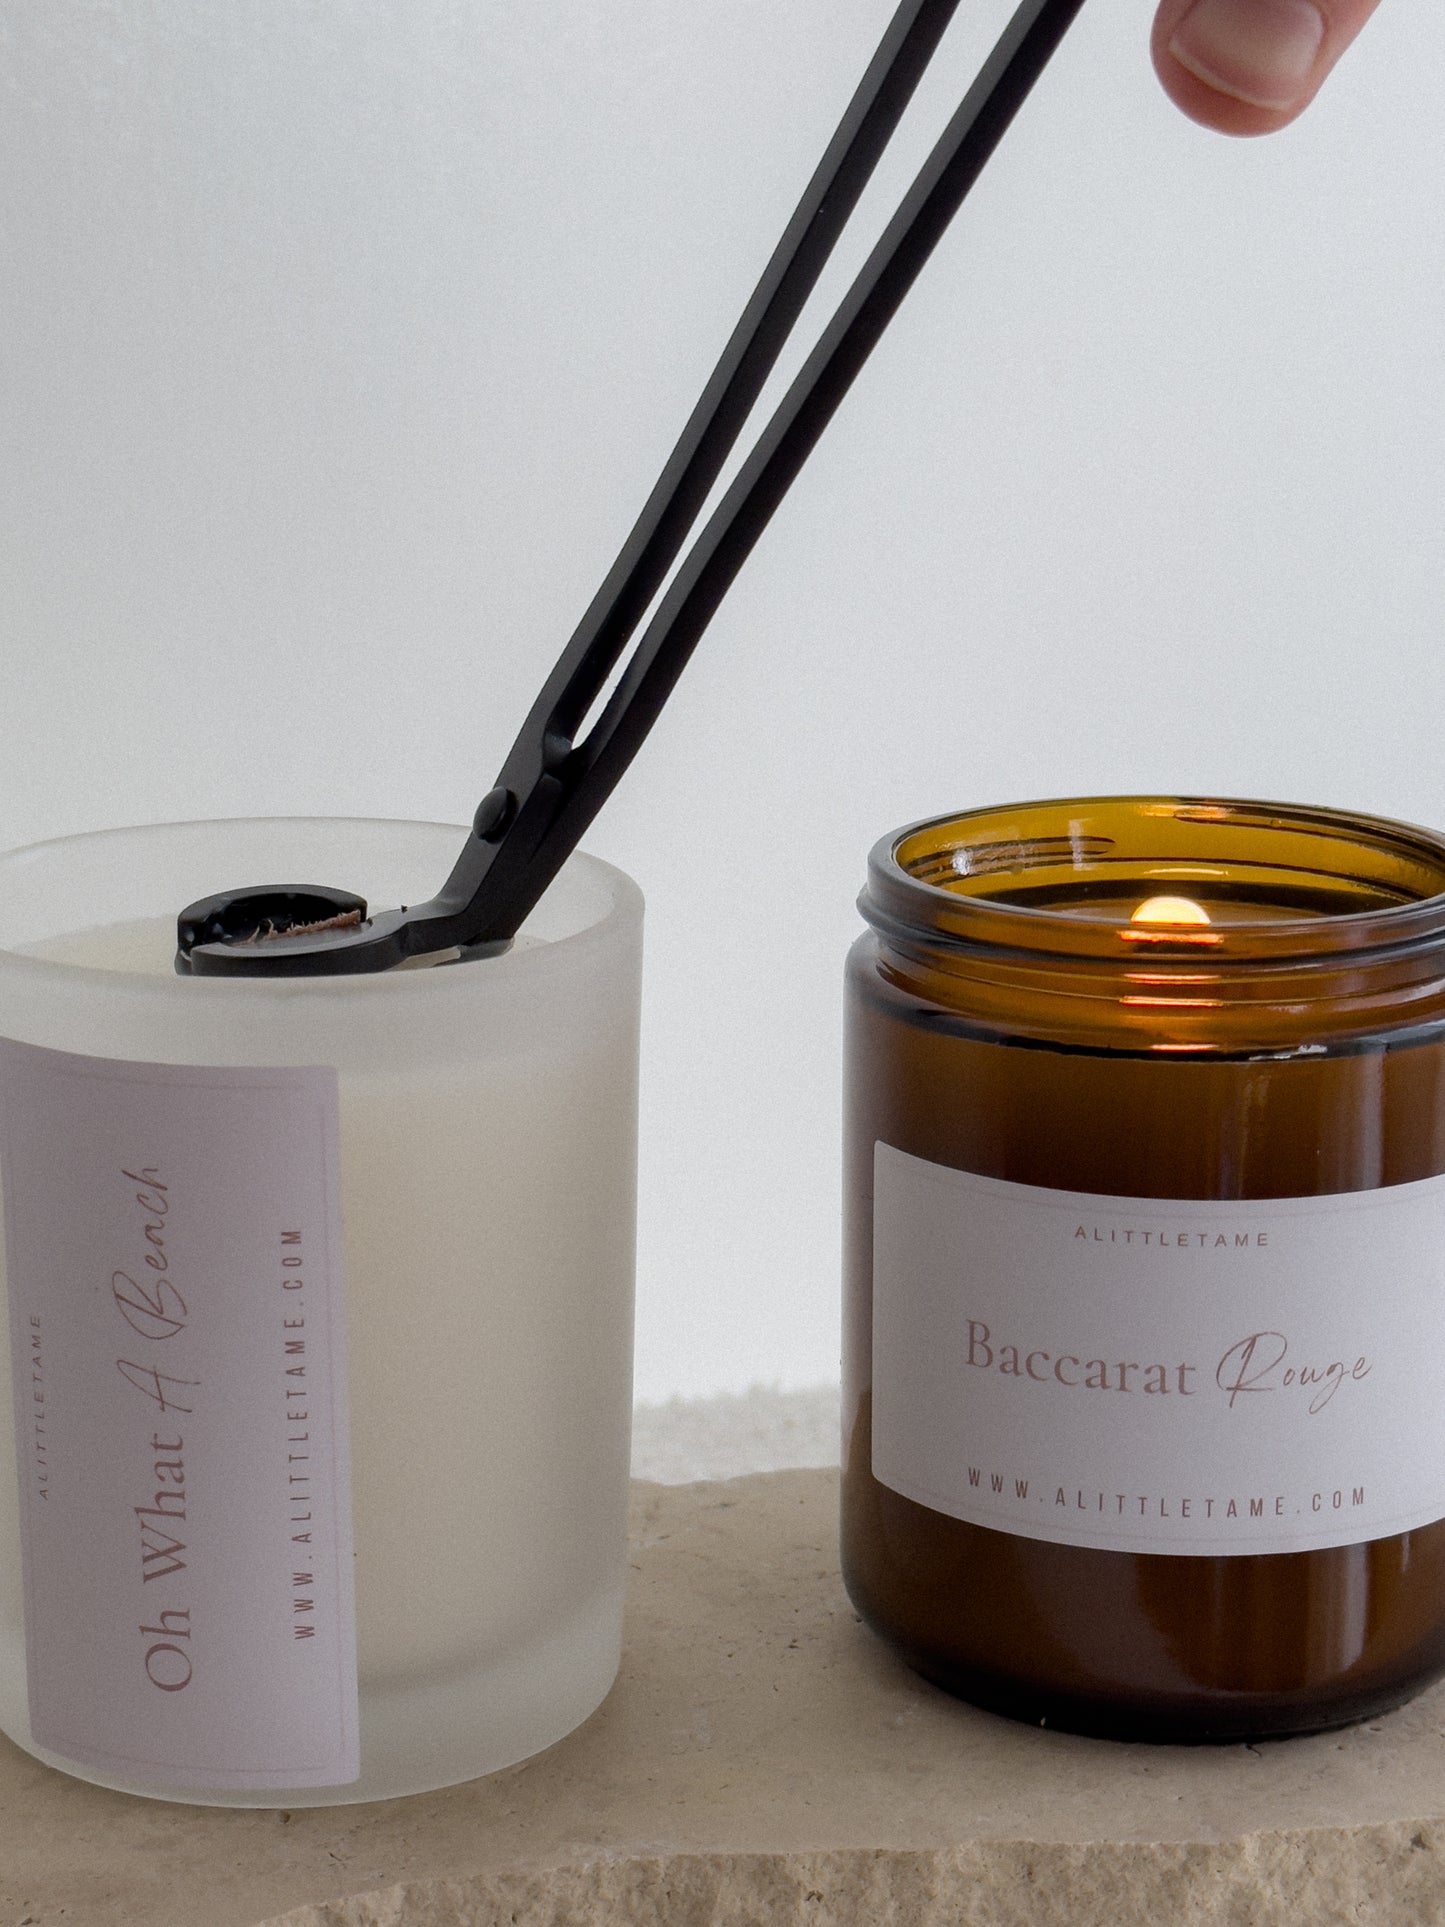 Naked Fragrance Candle | PRE-ORDER | Frosted and Amber Jars